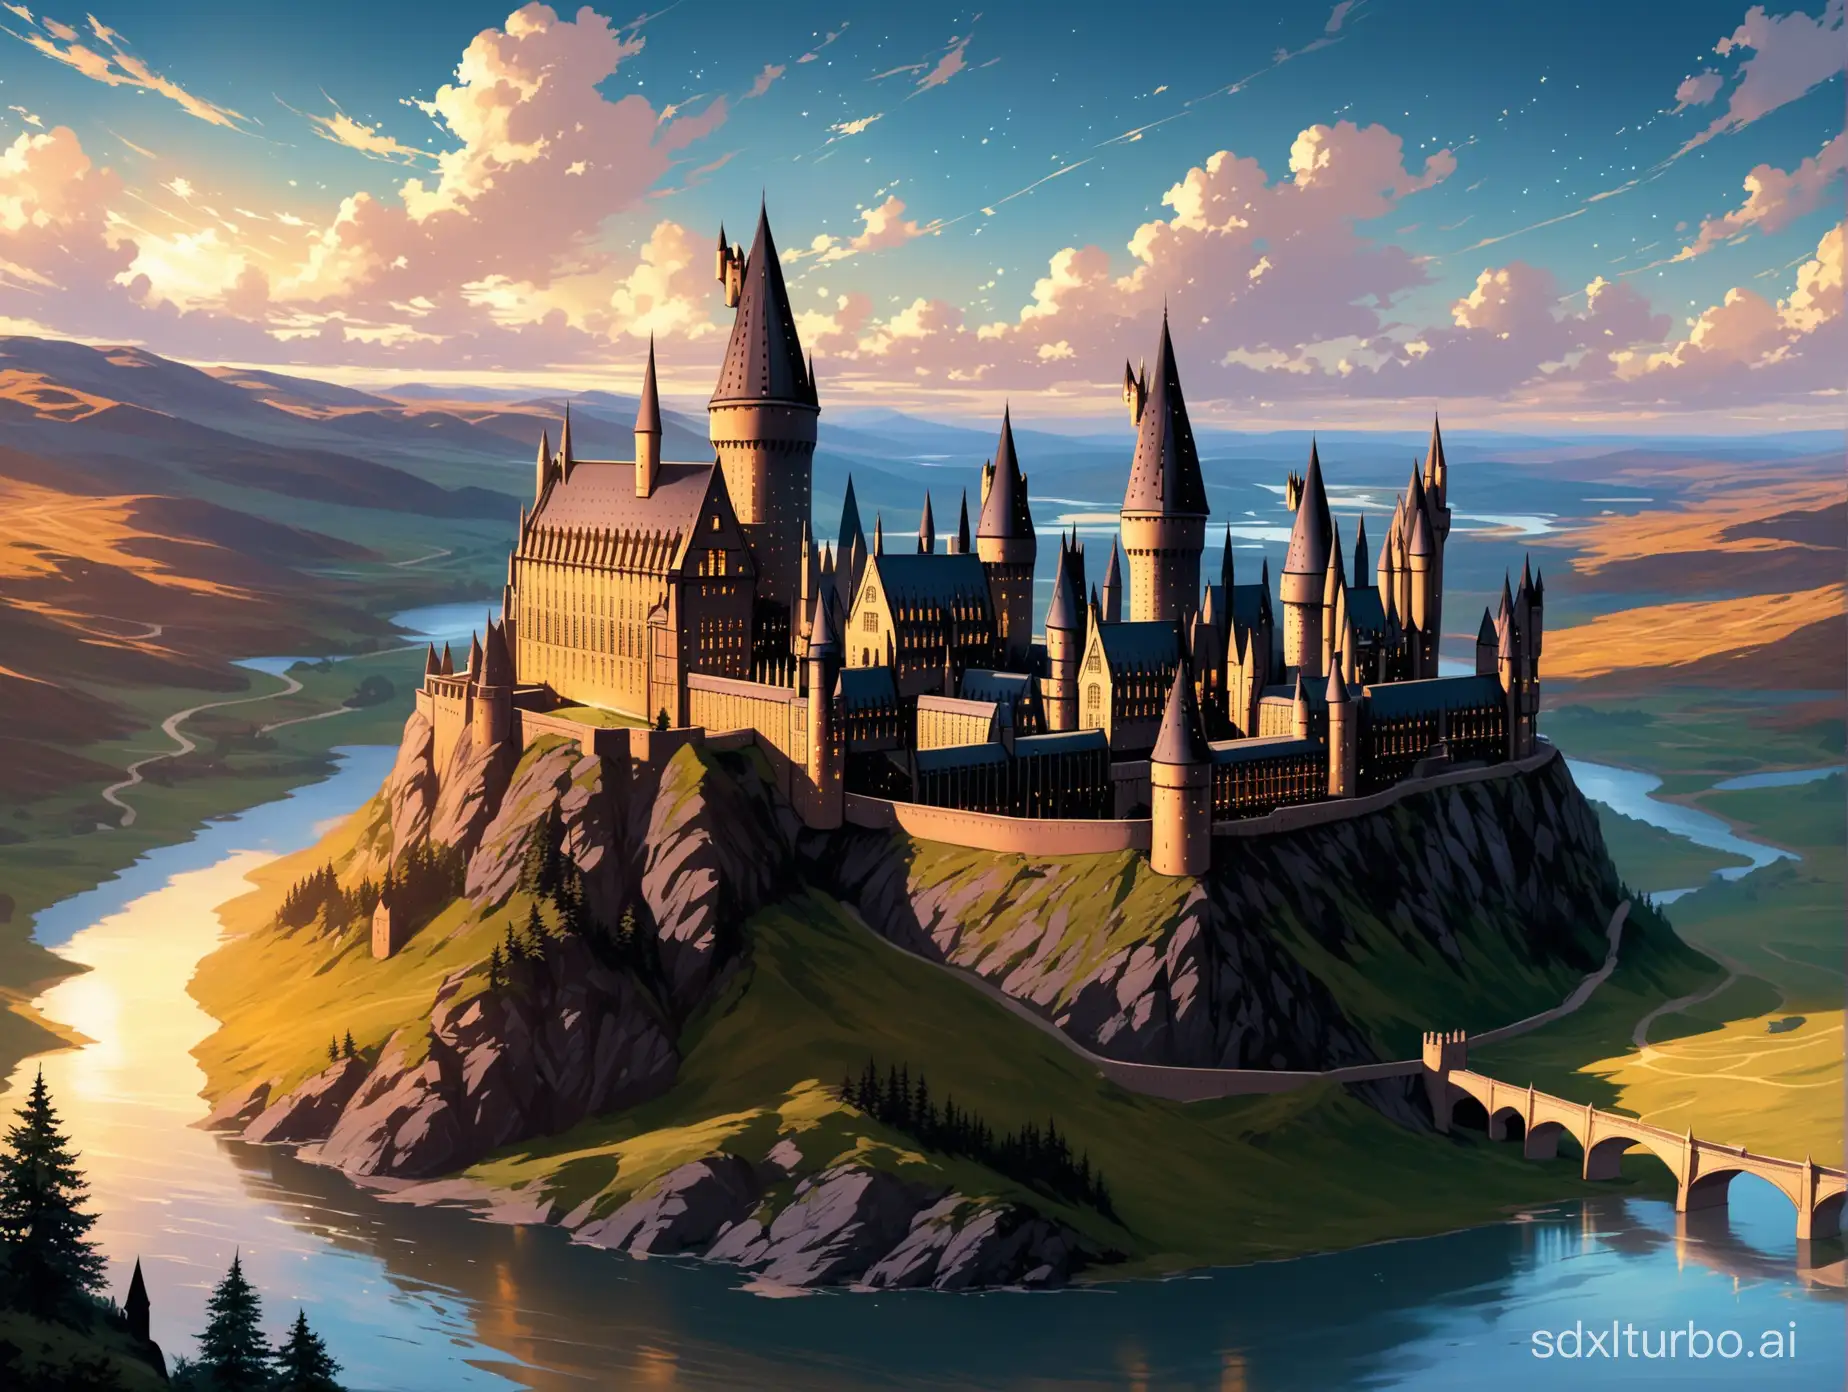 Magical-Hogwarts-School-of-Witchcraft-and-Wizardry-in-the-United-Kingdom